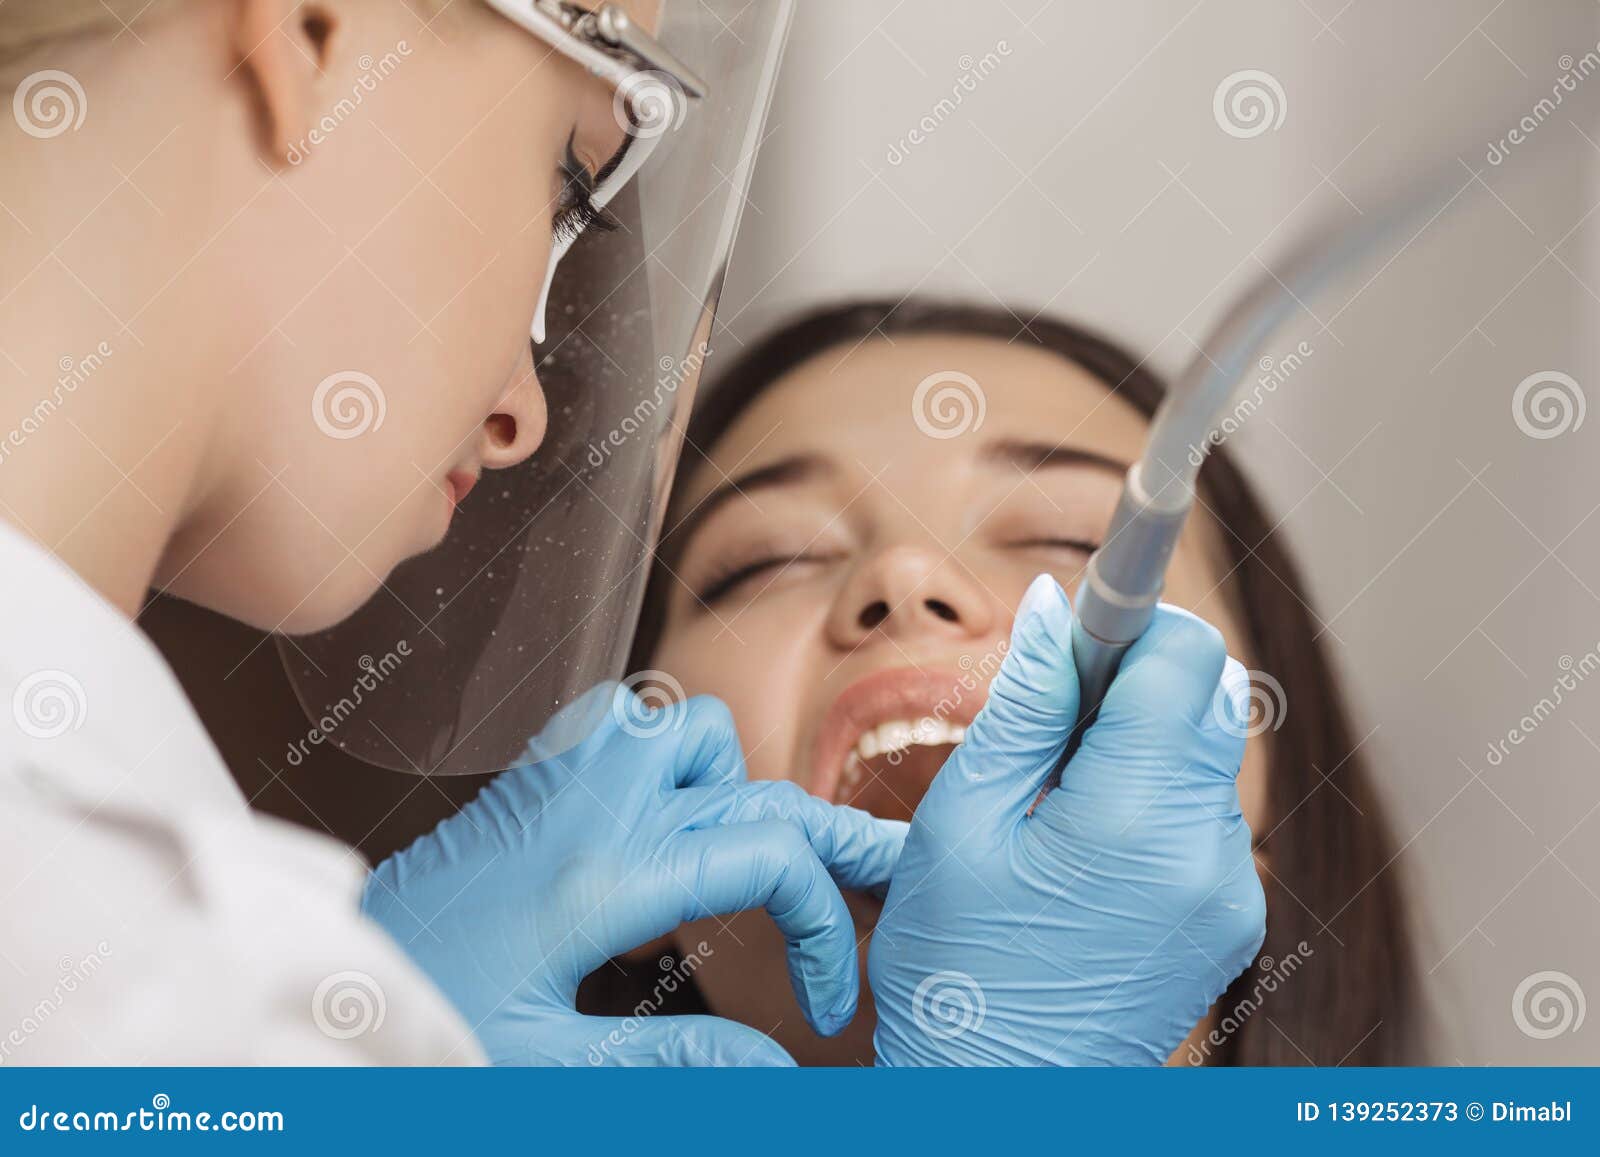 Dentist Doing A Dental Treatment On A Female Patient